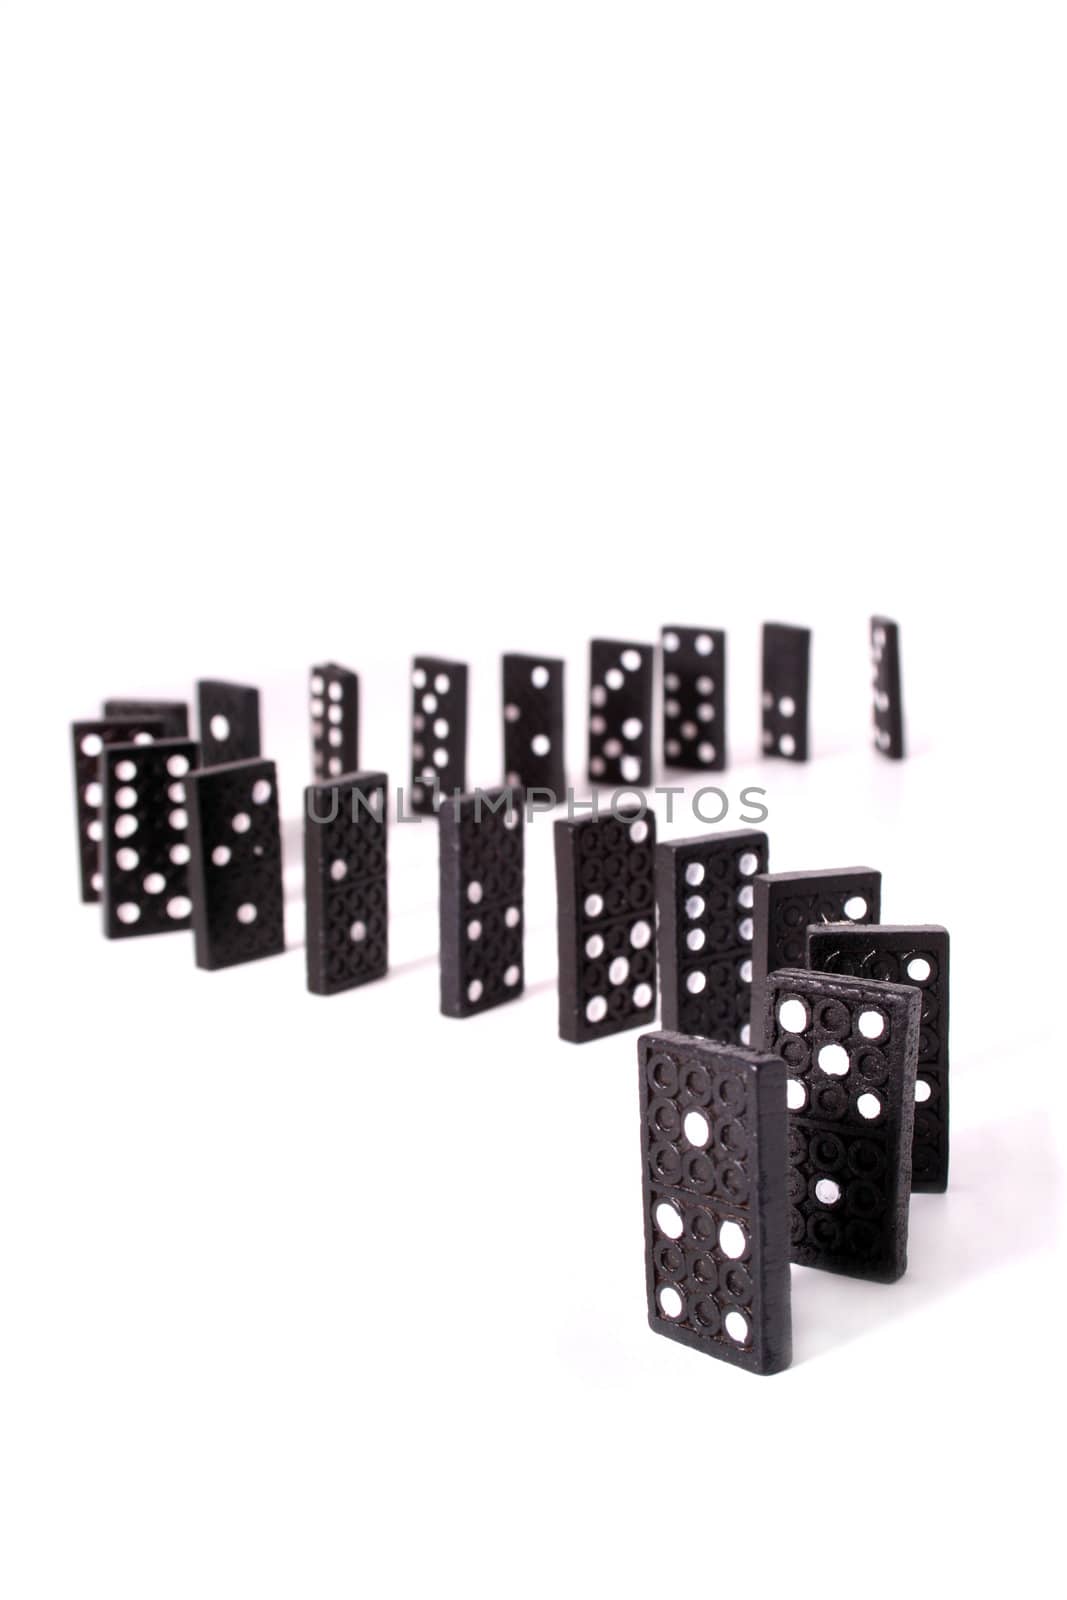 Several dominoes standing one after another in front o a white background.